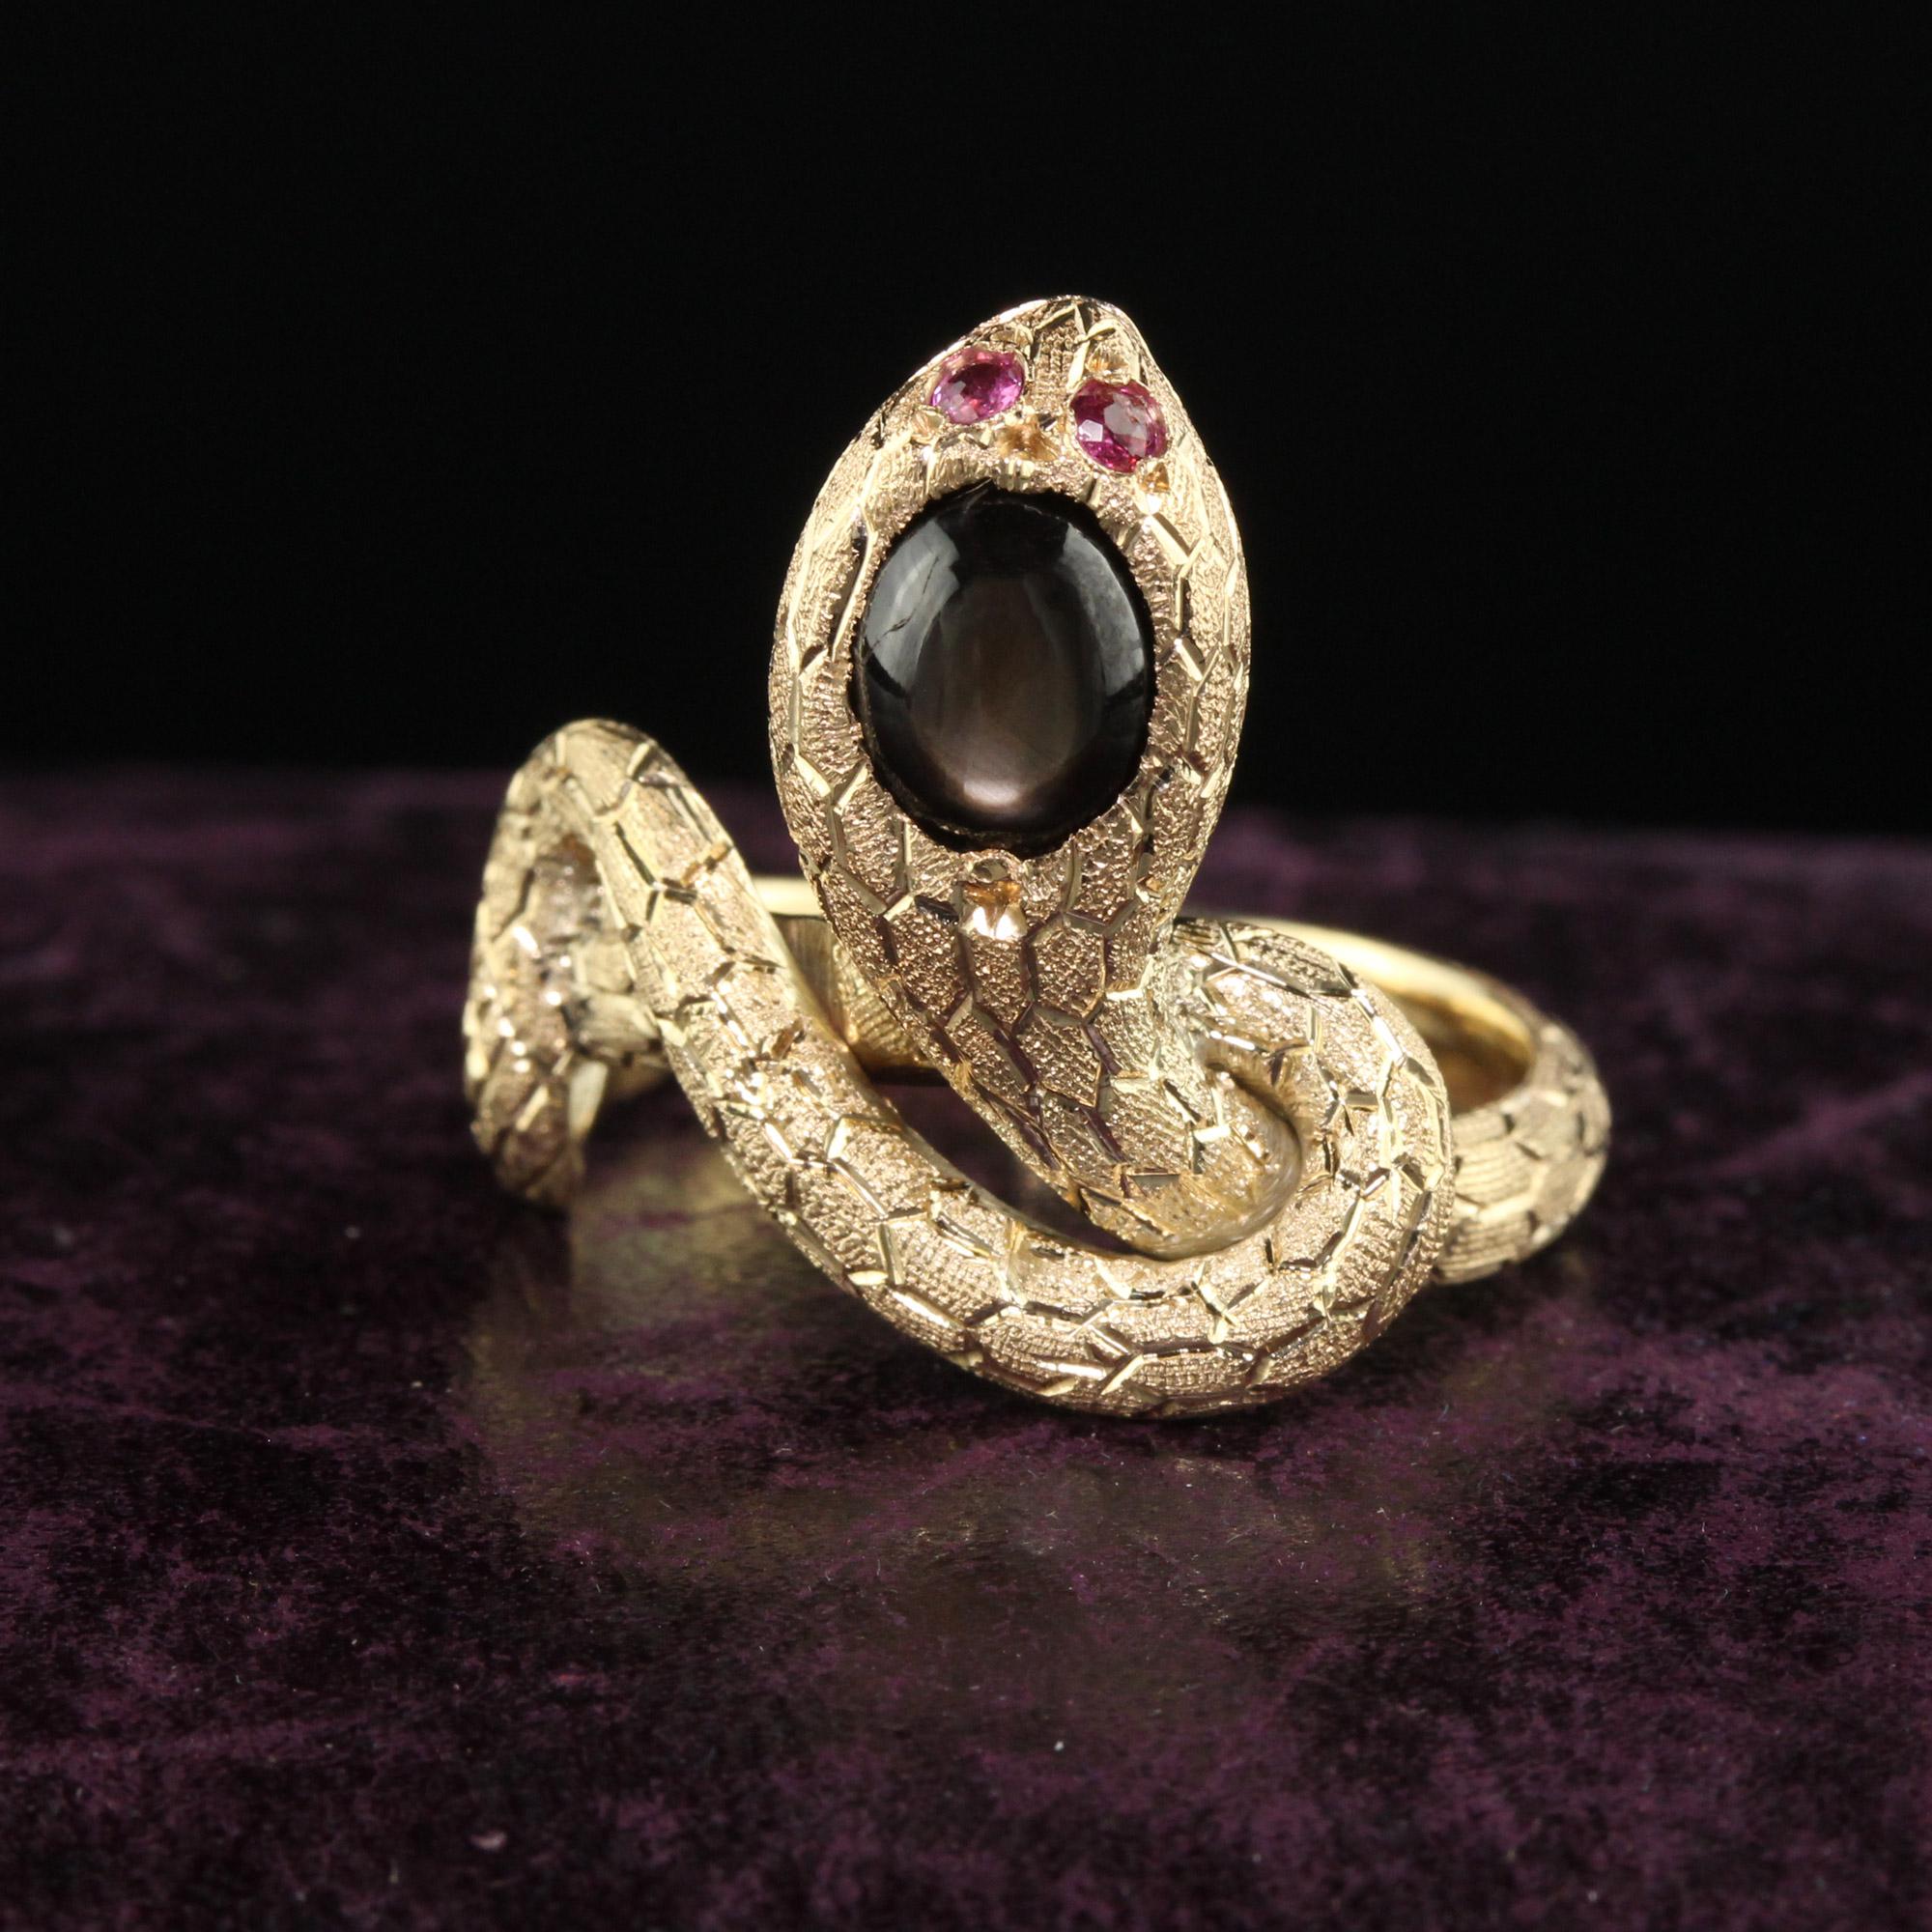 Beautiful Vintage Estate 18K Yellow Gold Black Star Sapphire and Ruby Snake Ring. This beautiful snake ring is crafted in 14k yellow gold. The head of the snake holds a black cabochon star sapphire with natural ruby eyes. The ring is in great